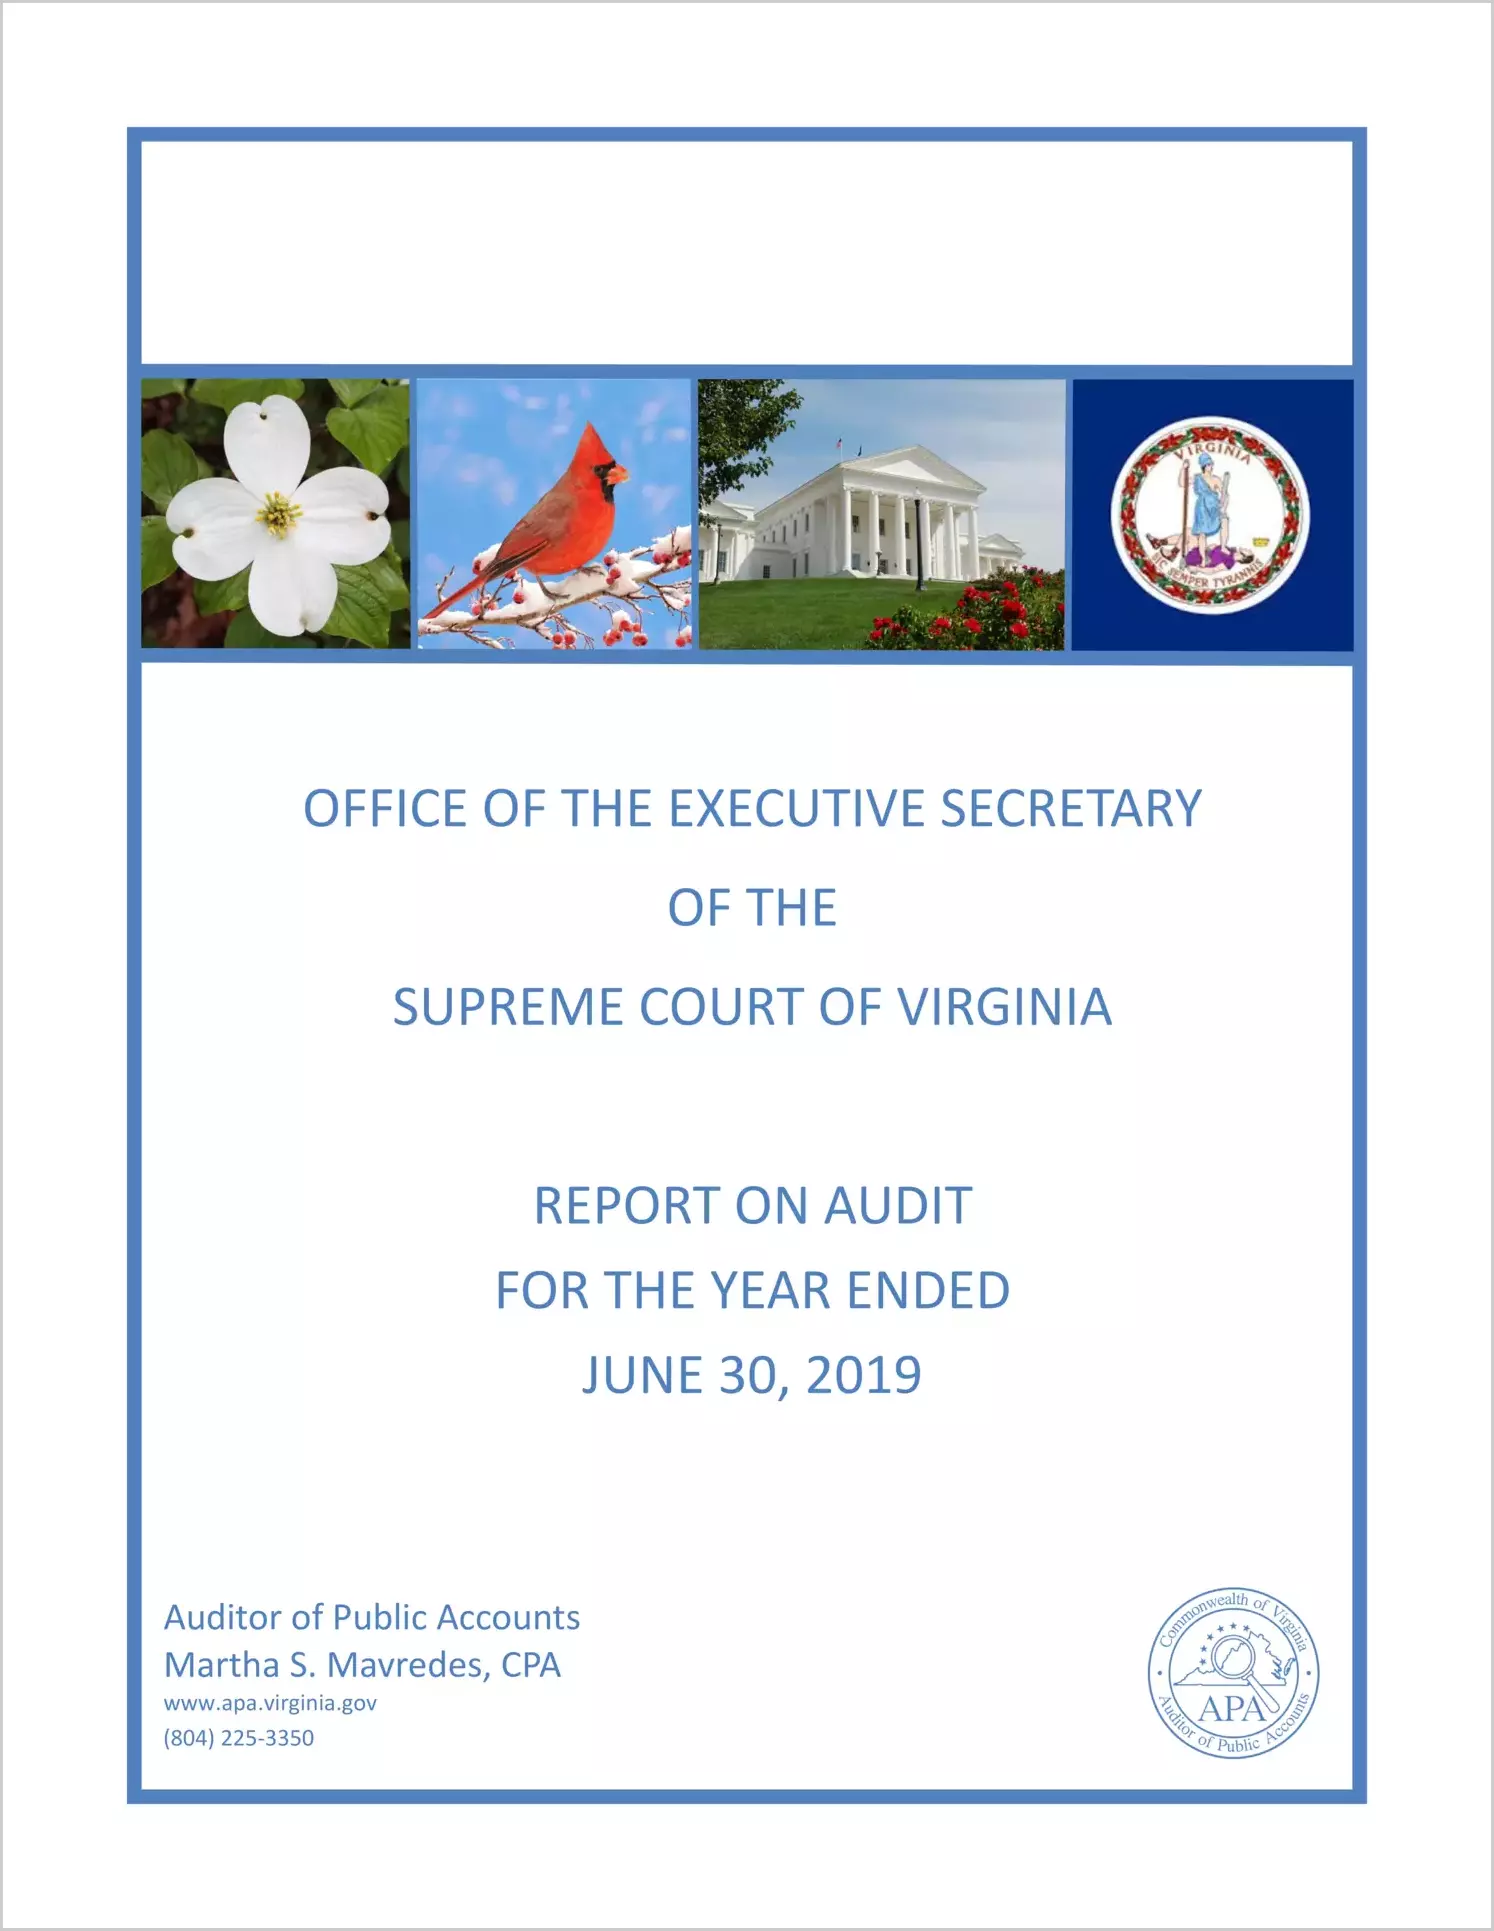 Office of the Executive Secretary of the Supreme Court of Virginia for the year ended June 30, 2019